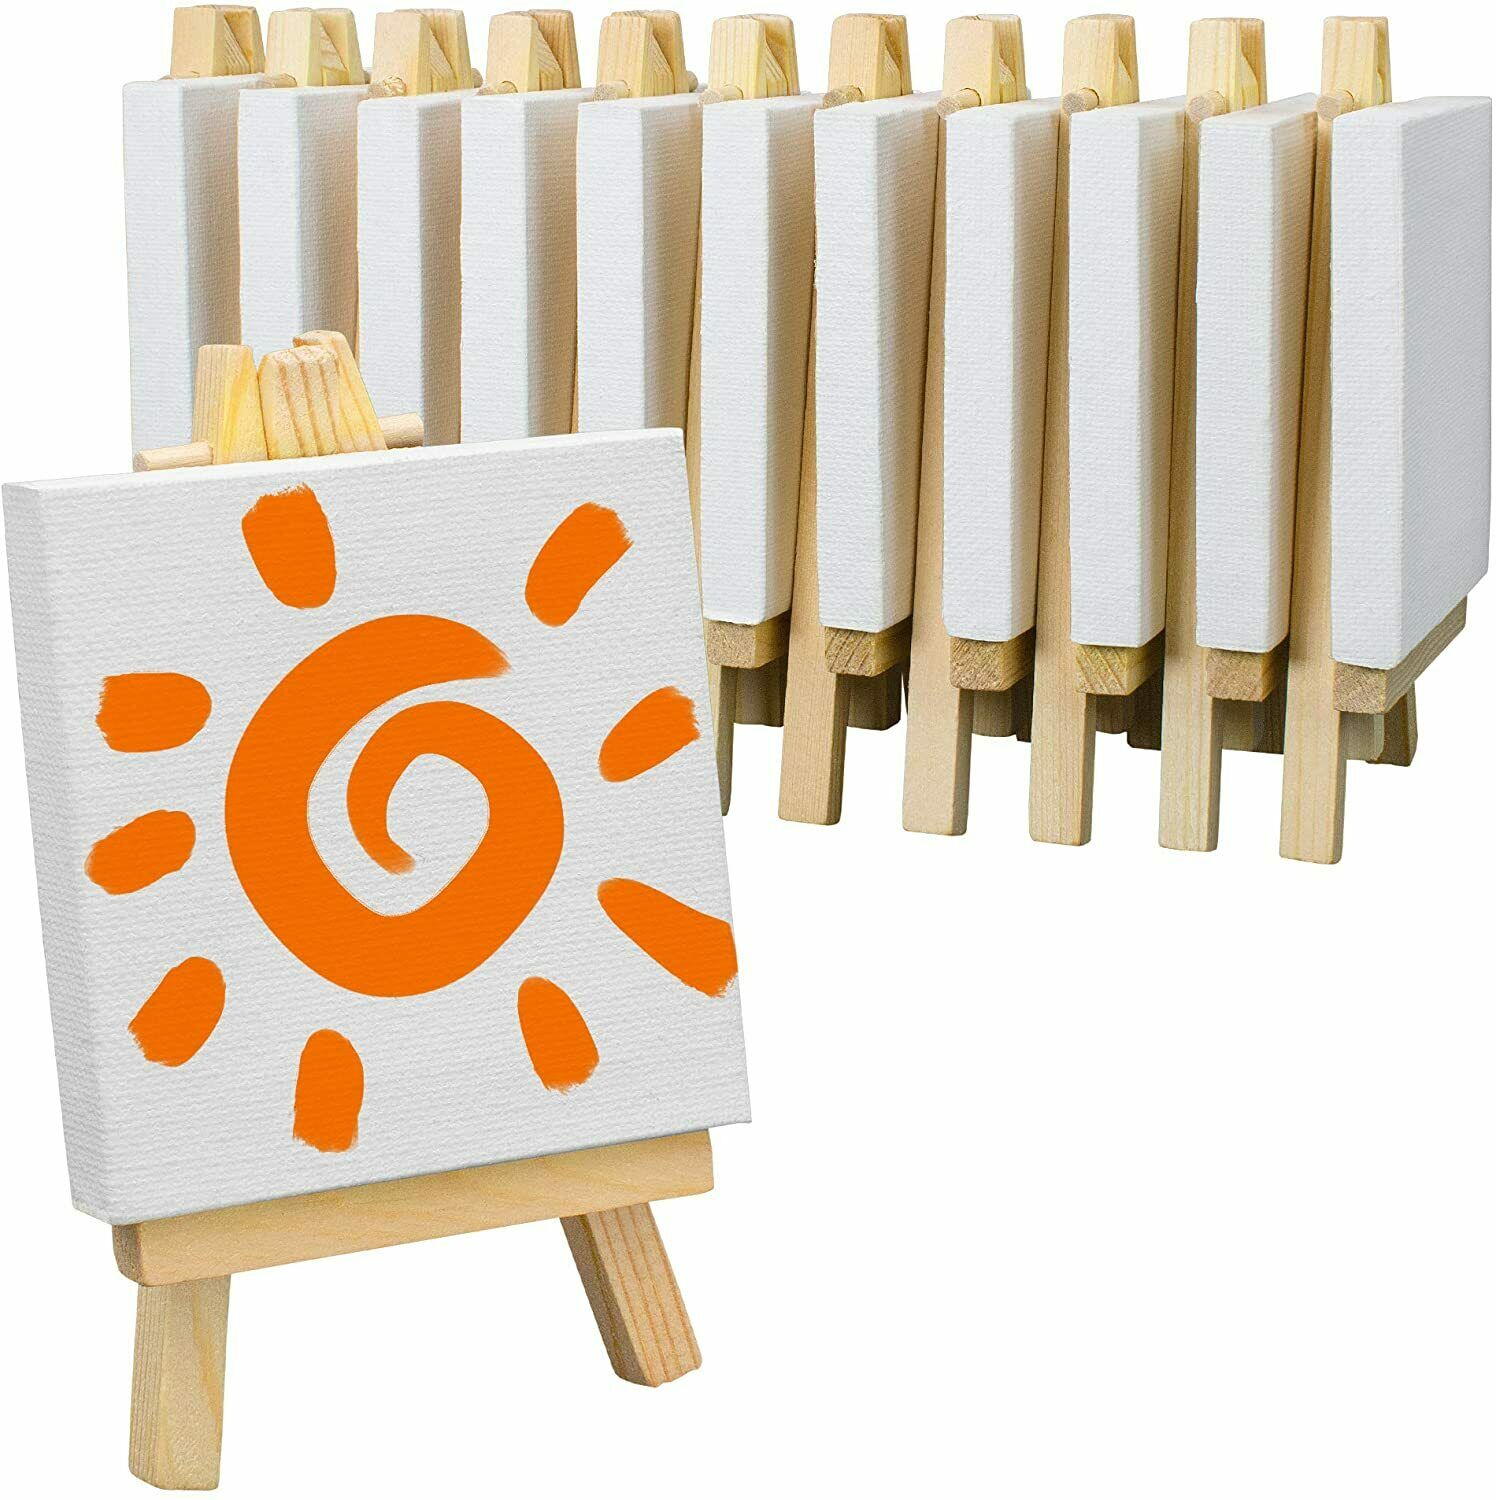 Mini Stretched Canvas & Easel Set-12 Pack,small White Canvas Panel & Wood Easels